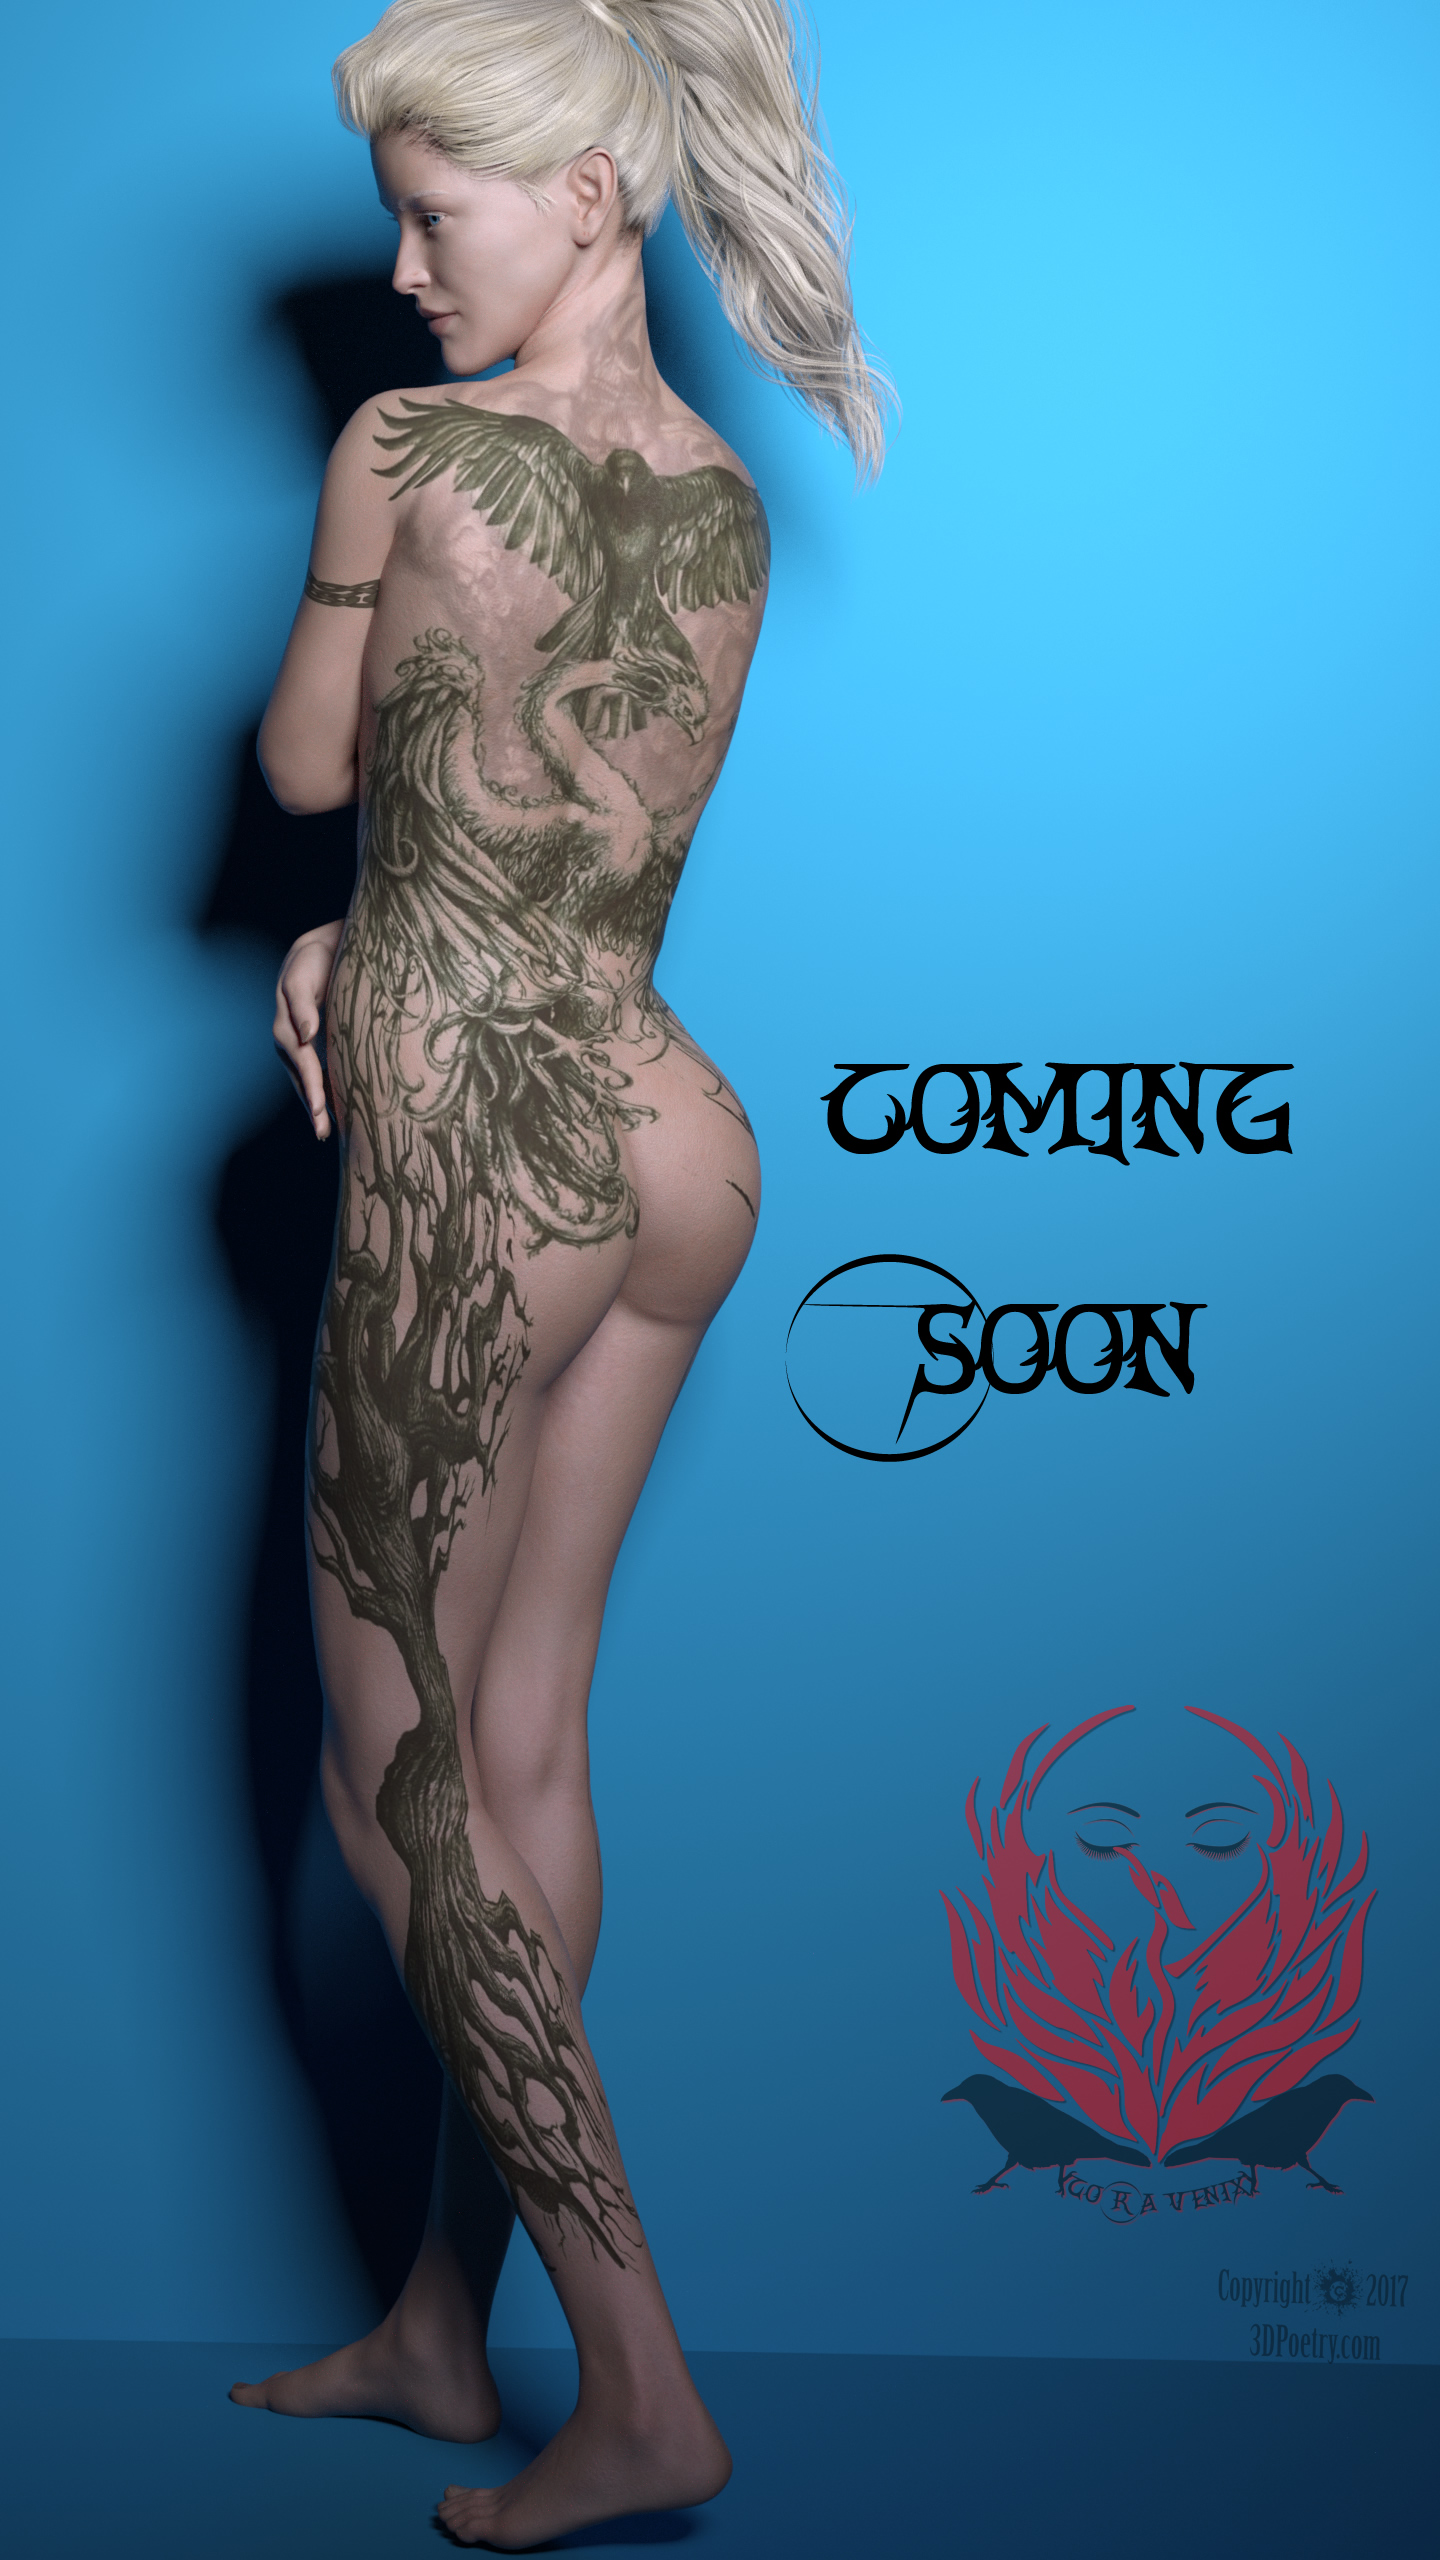 A new character is coming soon, Cora Venix.  A play on words incorporating all the great passages of the Crow, Raven, Phoenix, and of course the Vixen herself.